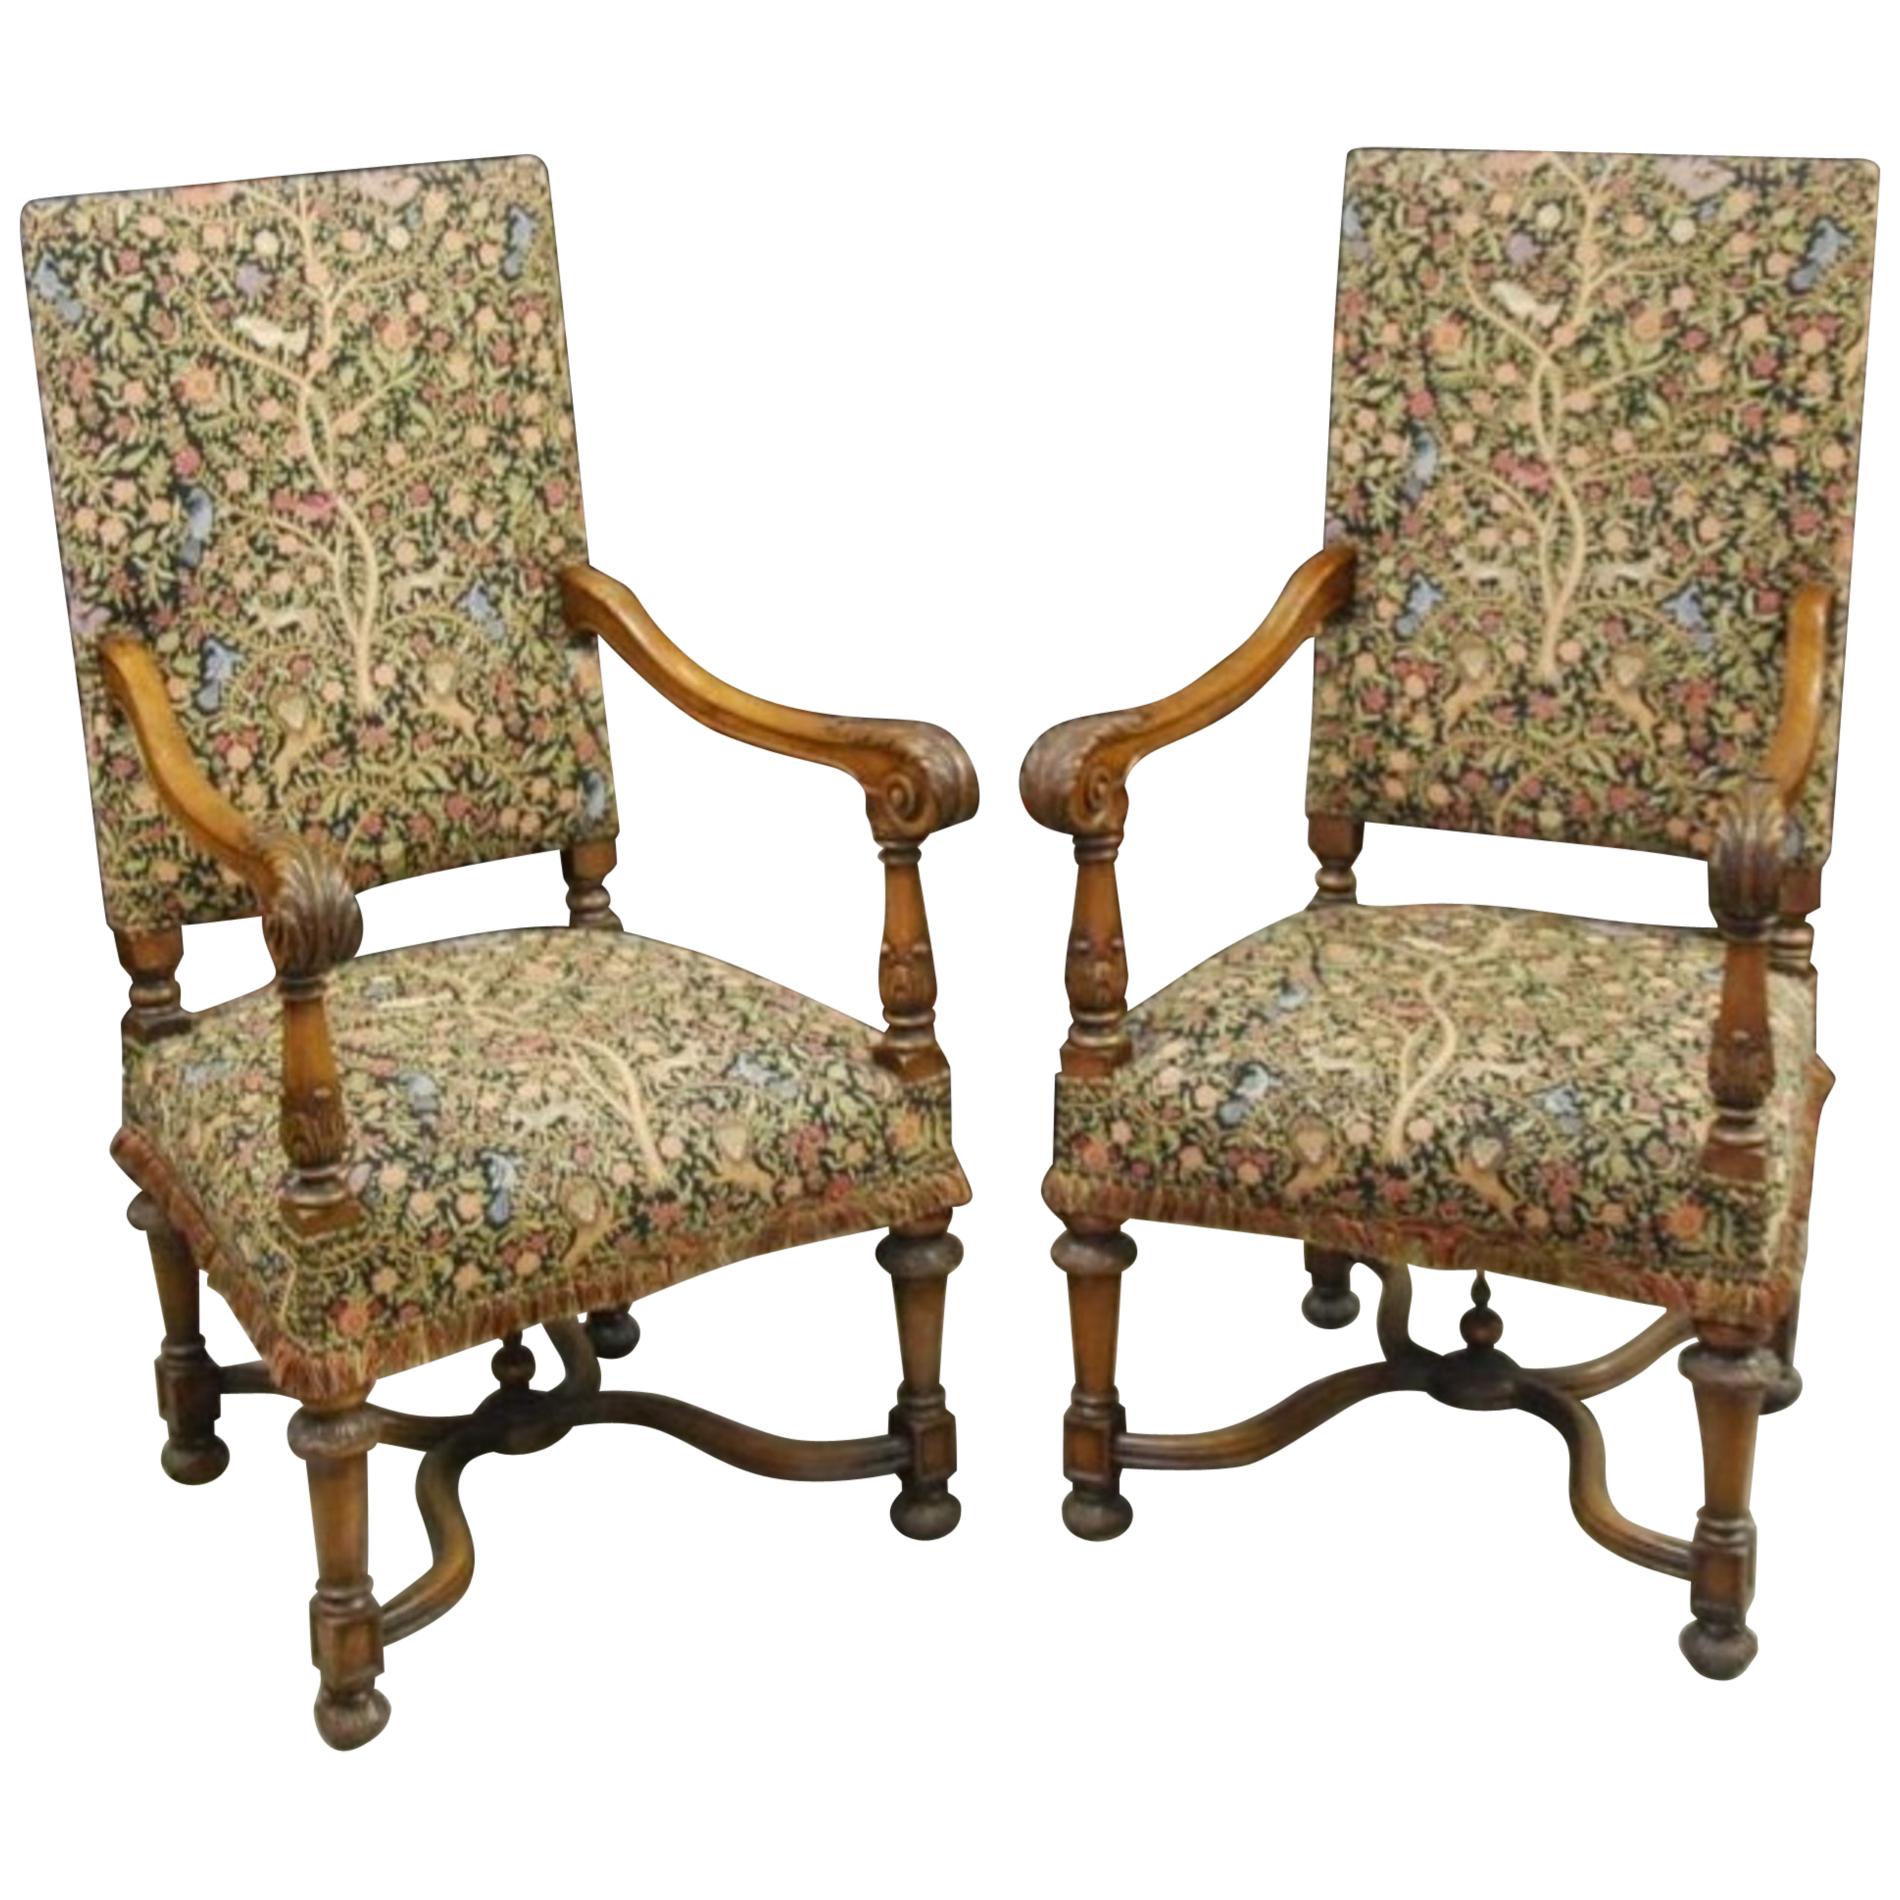 Elegant Pair of French Baroque Style Carved Fauteuils with Fabric Covers